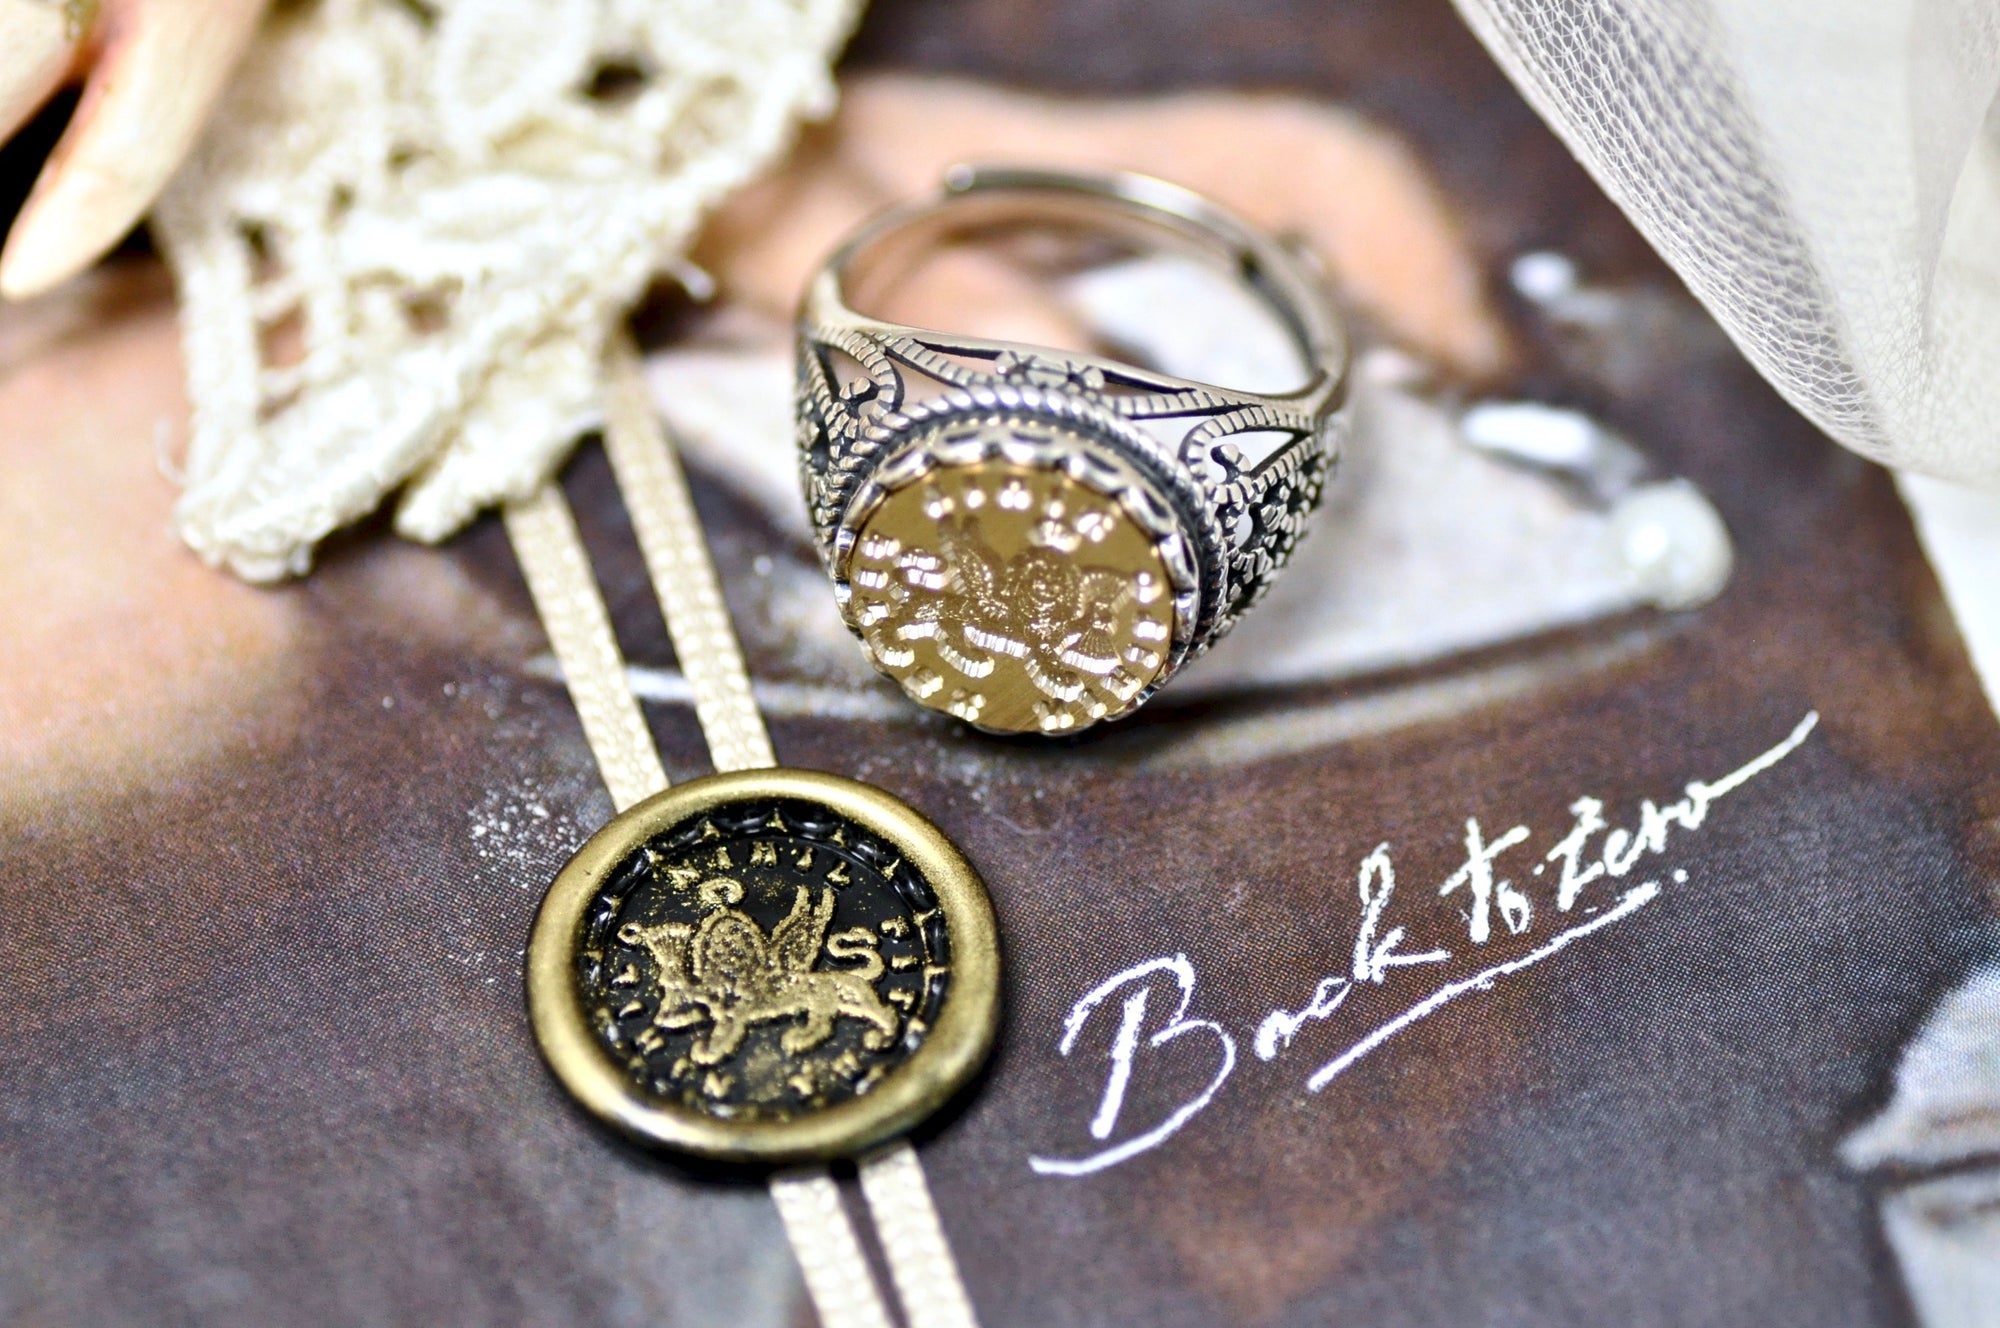 Winged Lion Latin Motto Lace Signet Ring - Backtozero B20 - 12l, 12mm, 12mm ring, 925 Silver, accessory, dedication, her, Intaglio, Intaglio ring, jewelry, lace, latin motto, signet, size 10, size 7, size 8, size 9, success, wax seal, wax seal ring, wax seal stamp